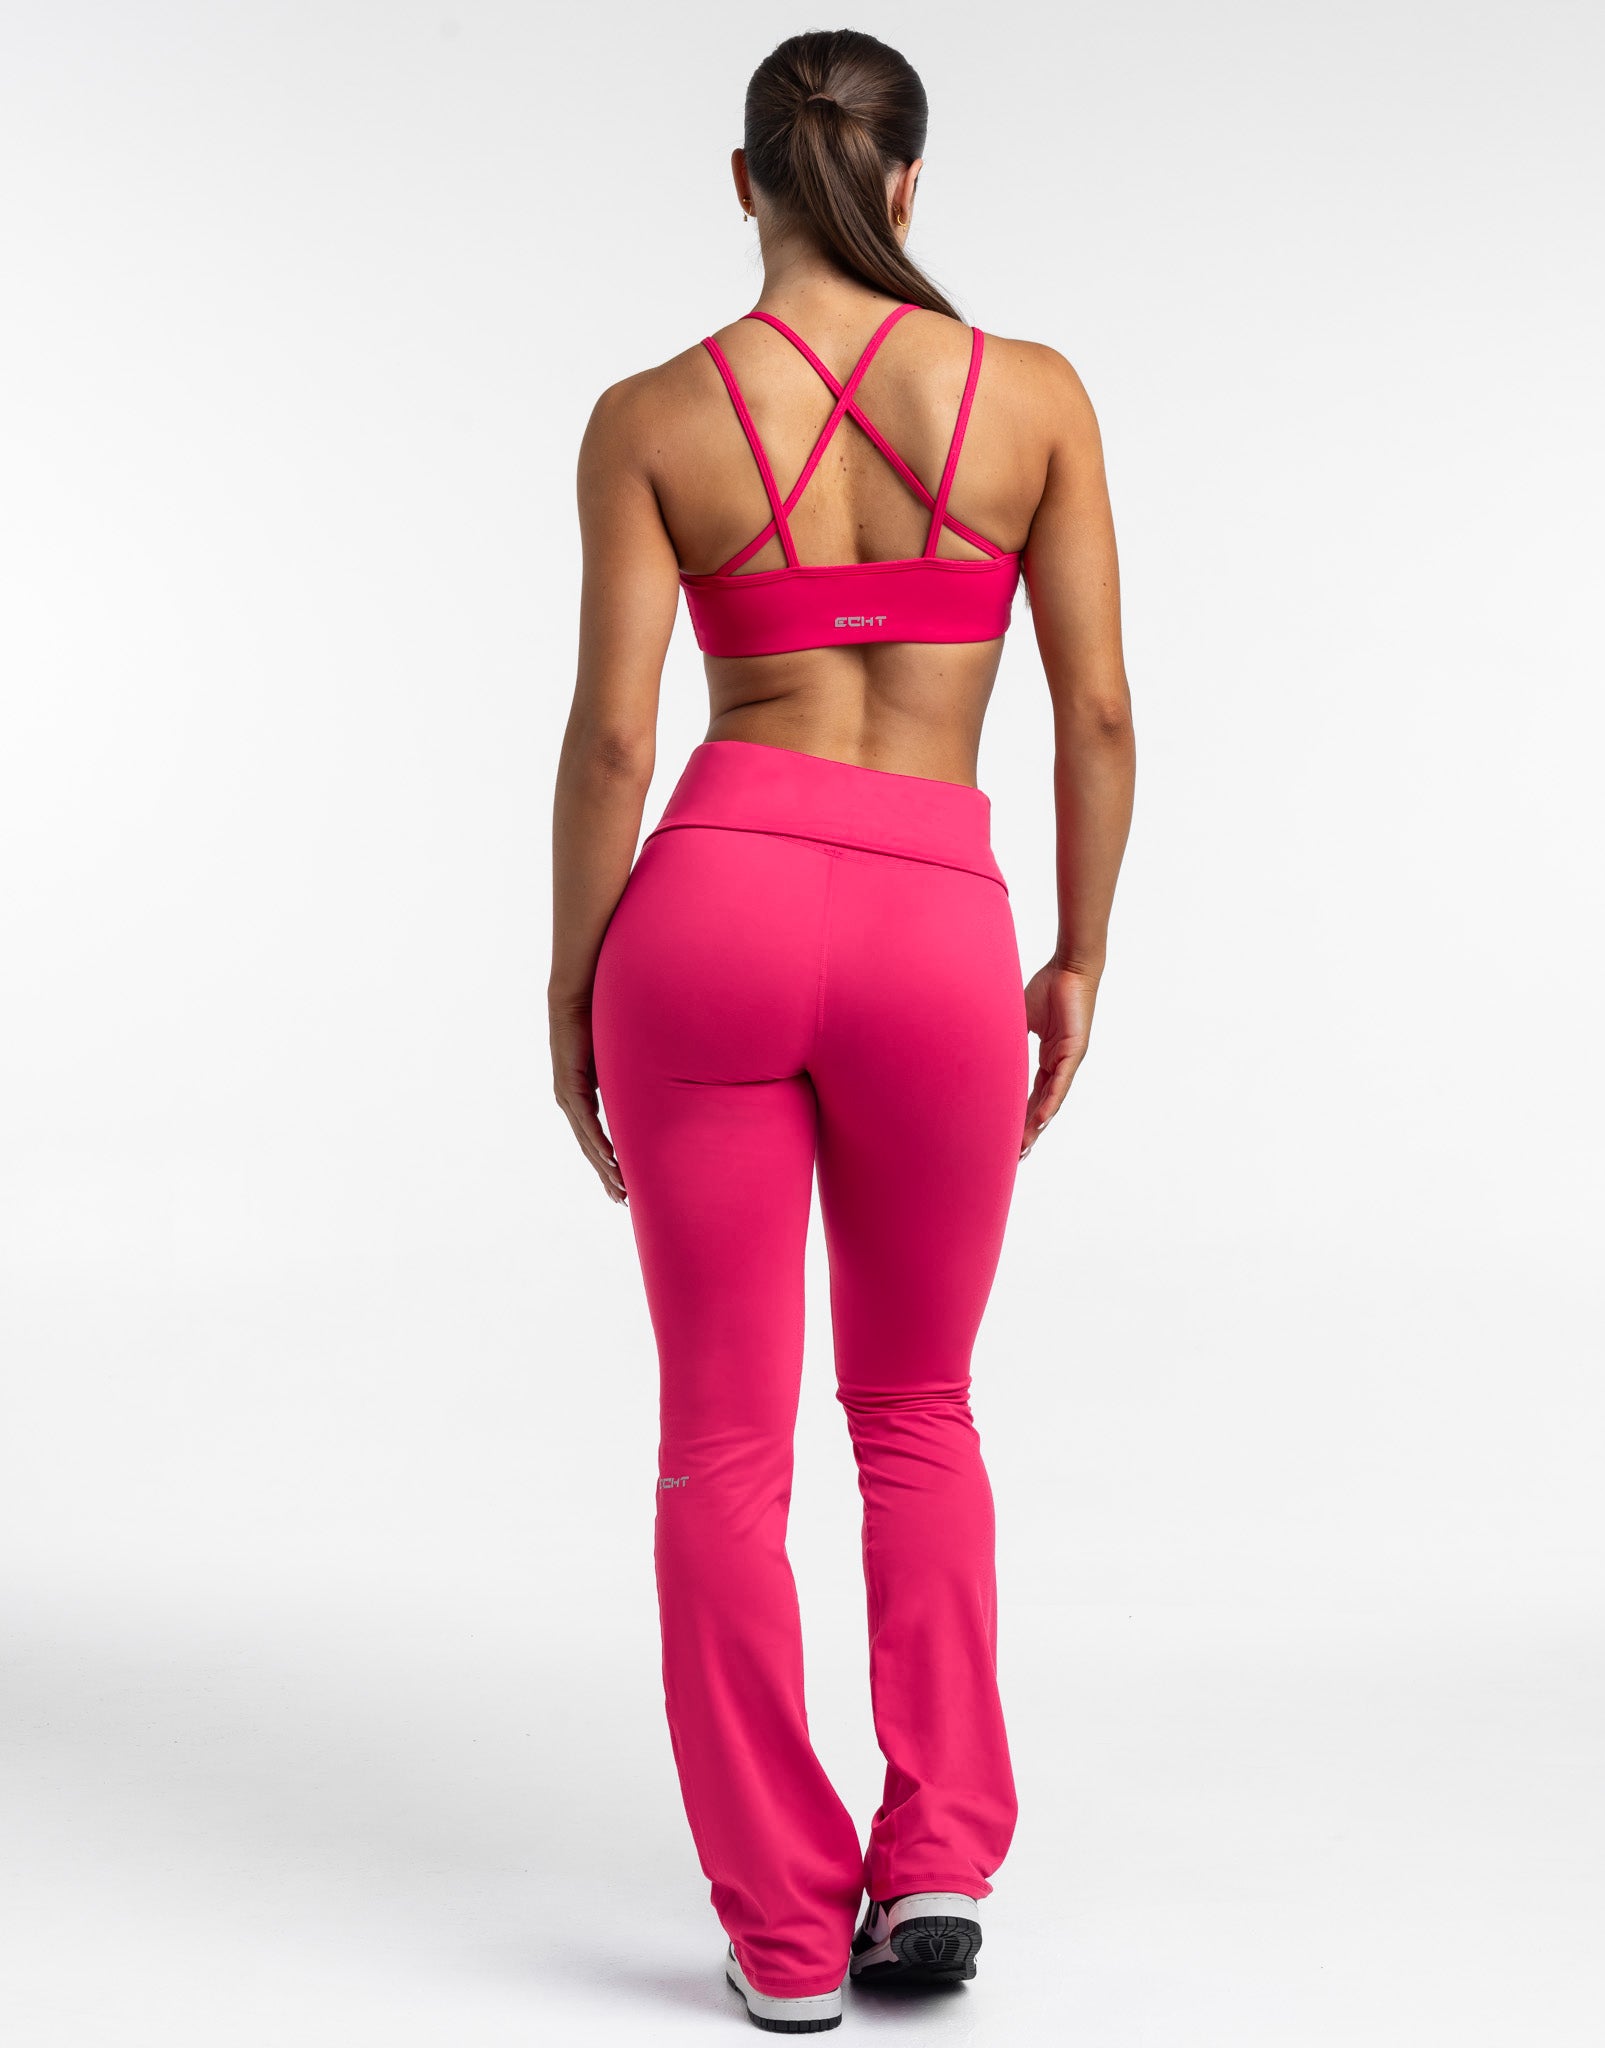 Fold Over Flare Leggings - Bright Pink